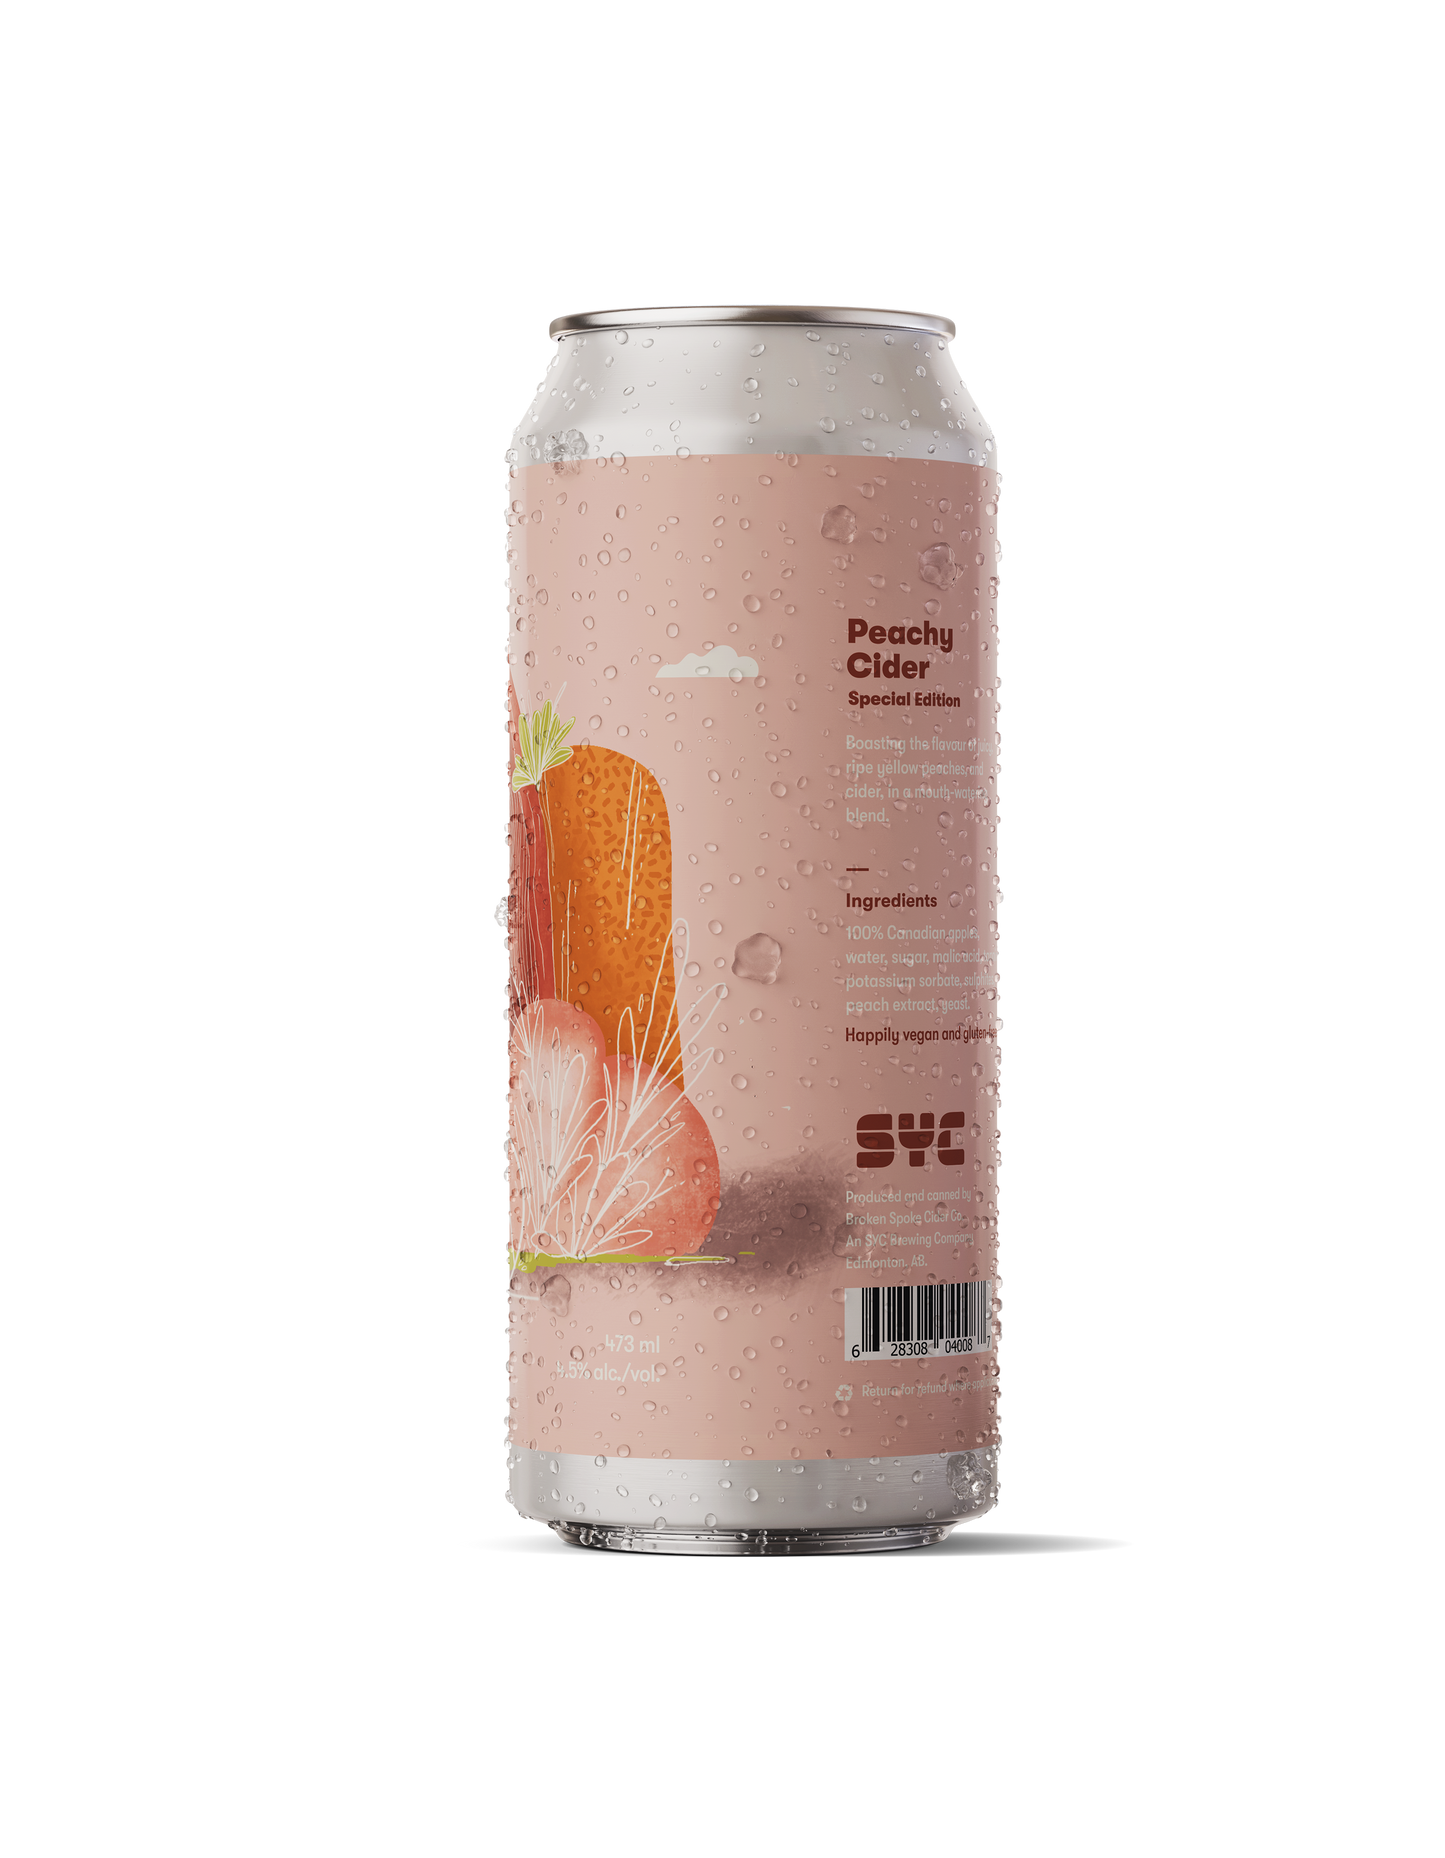 Right of Can Peachy Cider